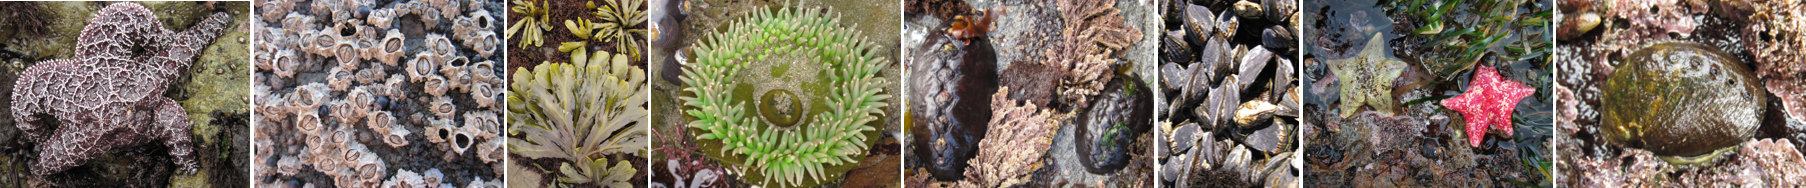 Pacific Rocky Intertidal Monitoring banner image